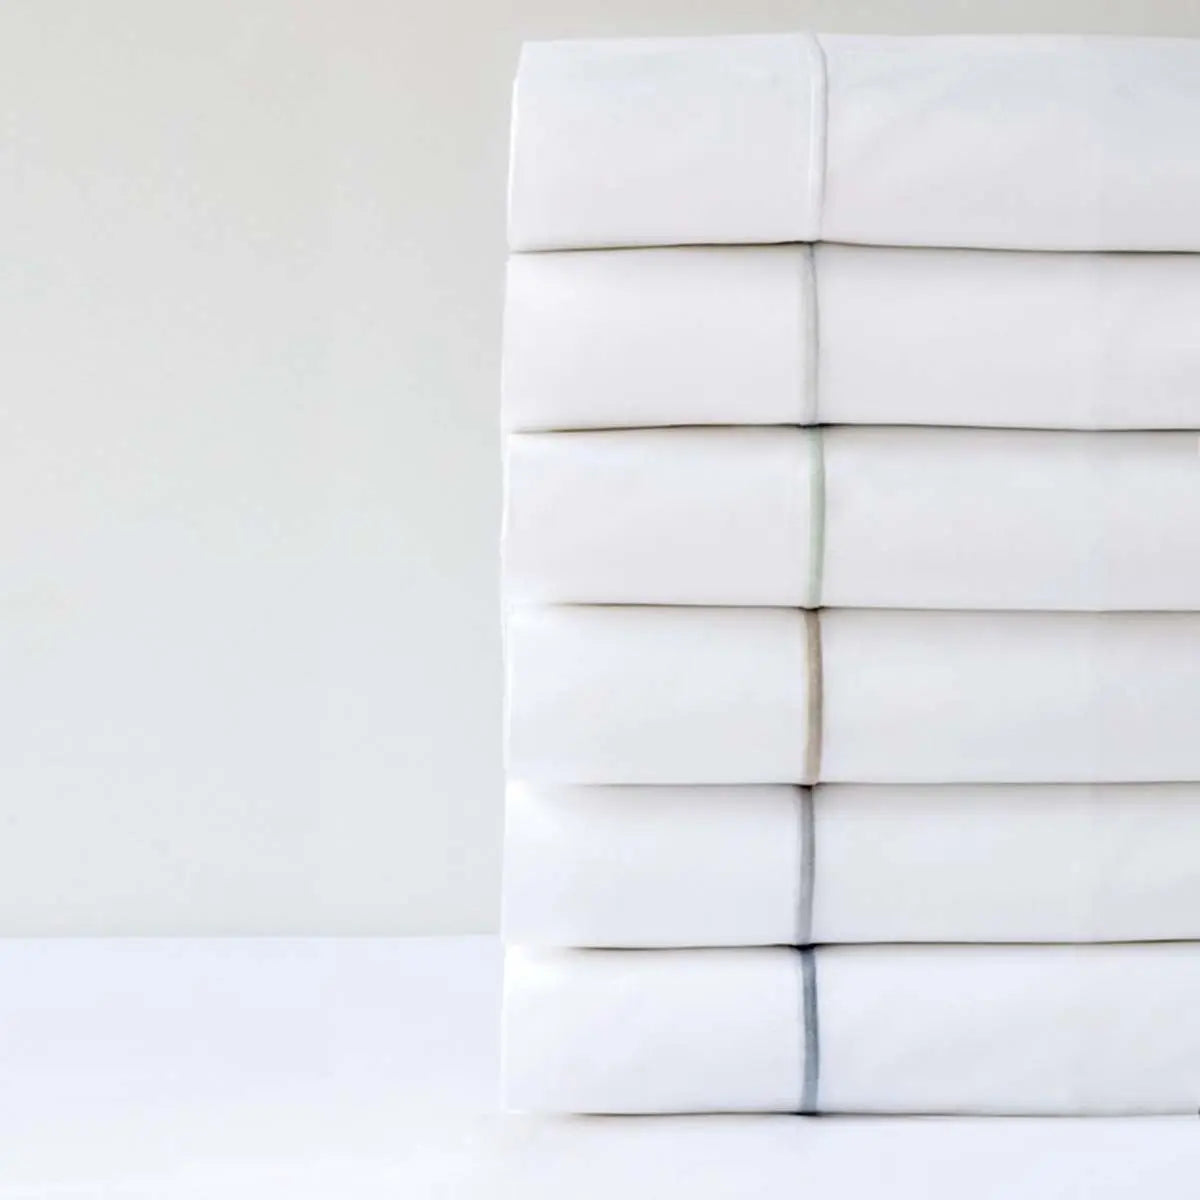 Bovi Classic Hotel Sheet Sets in Various colors, stacked together.